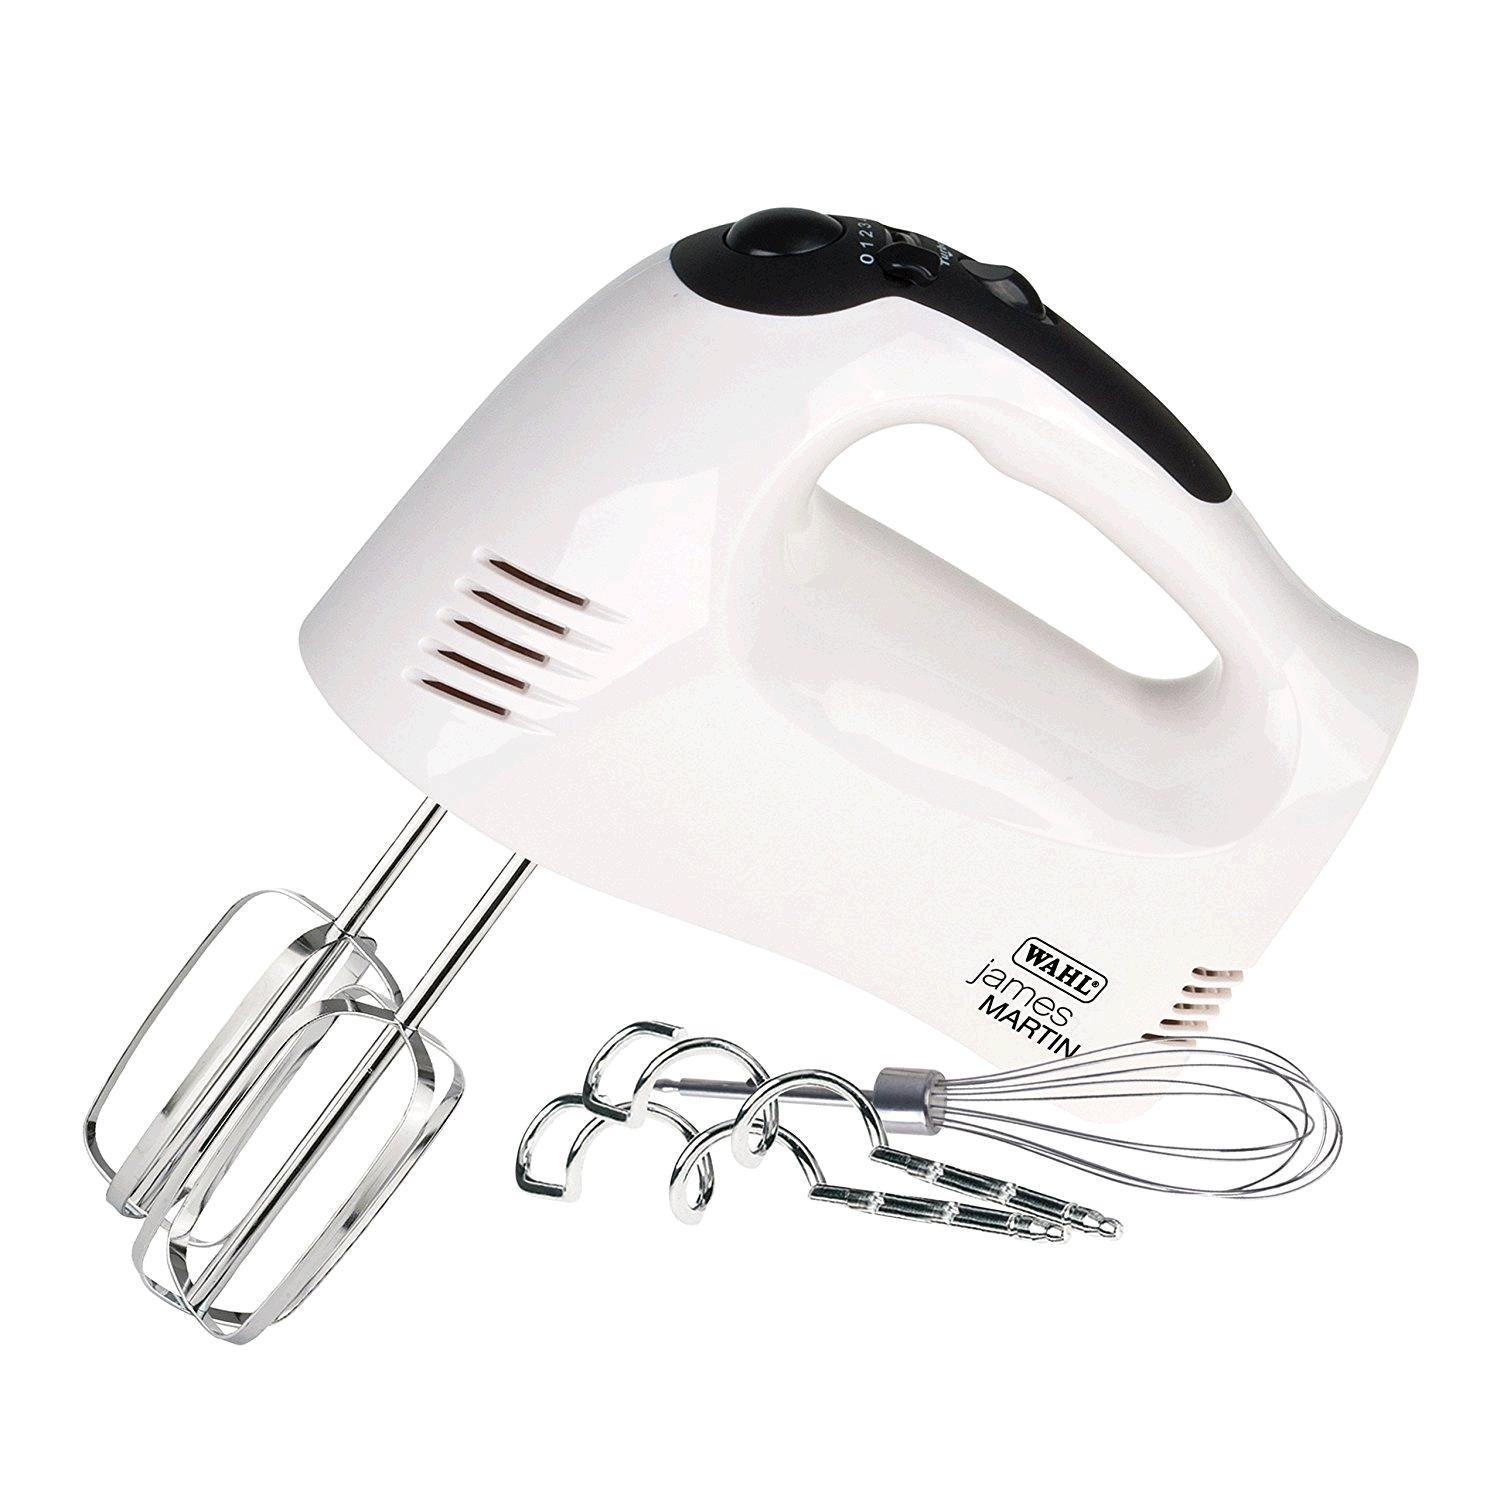 Wahl James Martin Hand Mixer 300w White c/w Stainless Steel Beaters WL8220